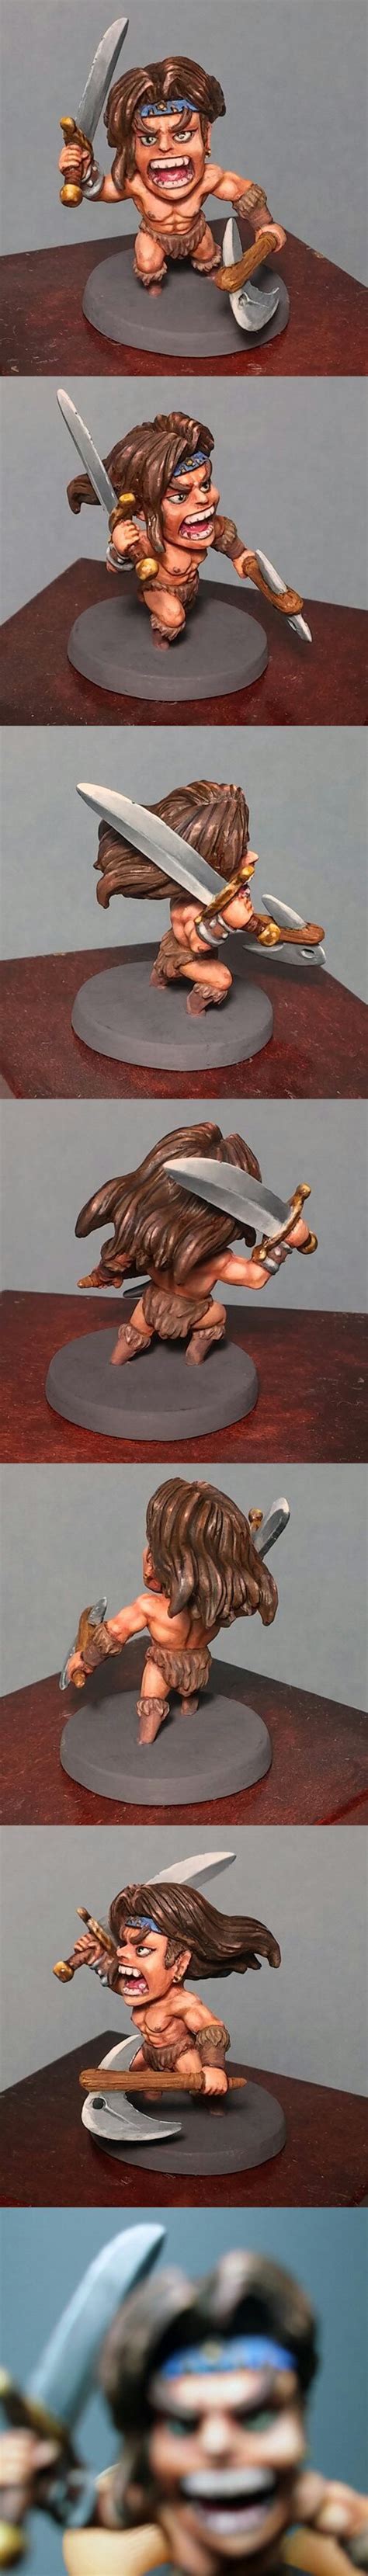 Grom Painted By Maenas From Arcadia Quest Game